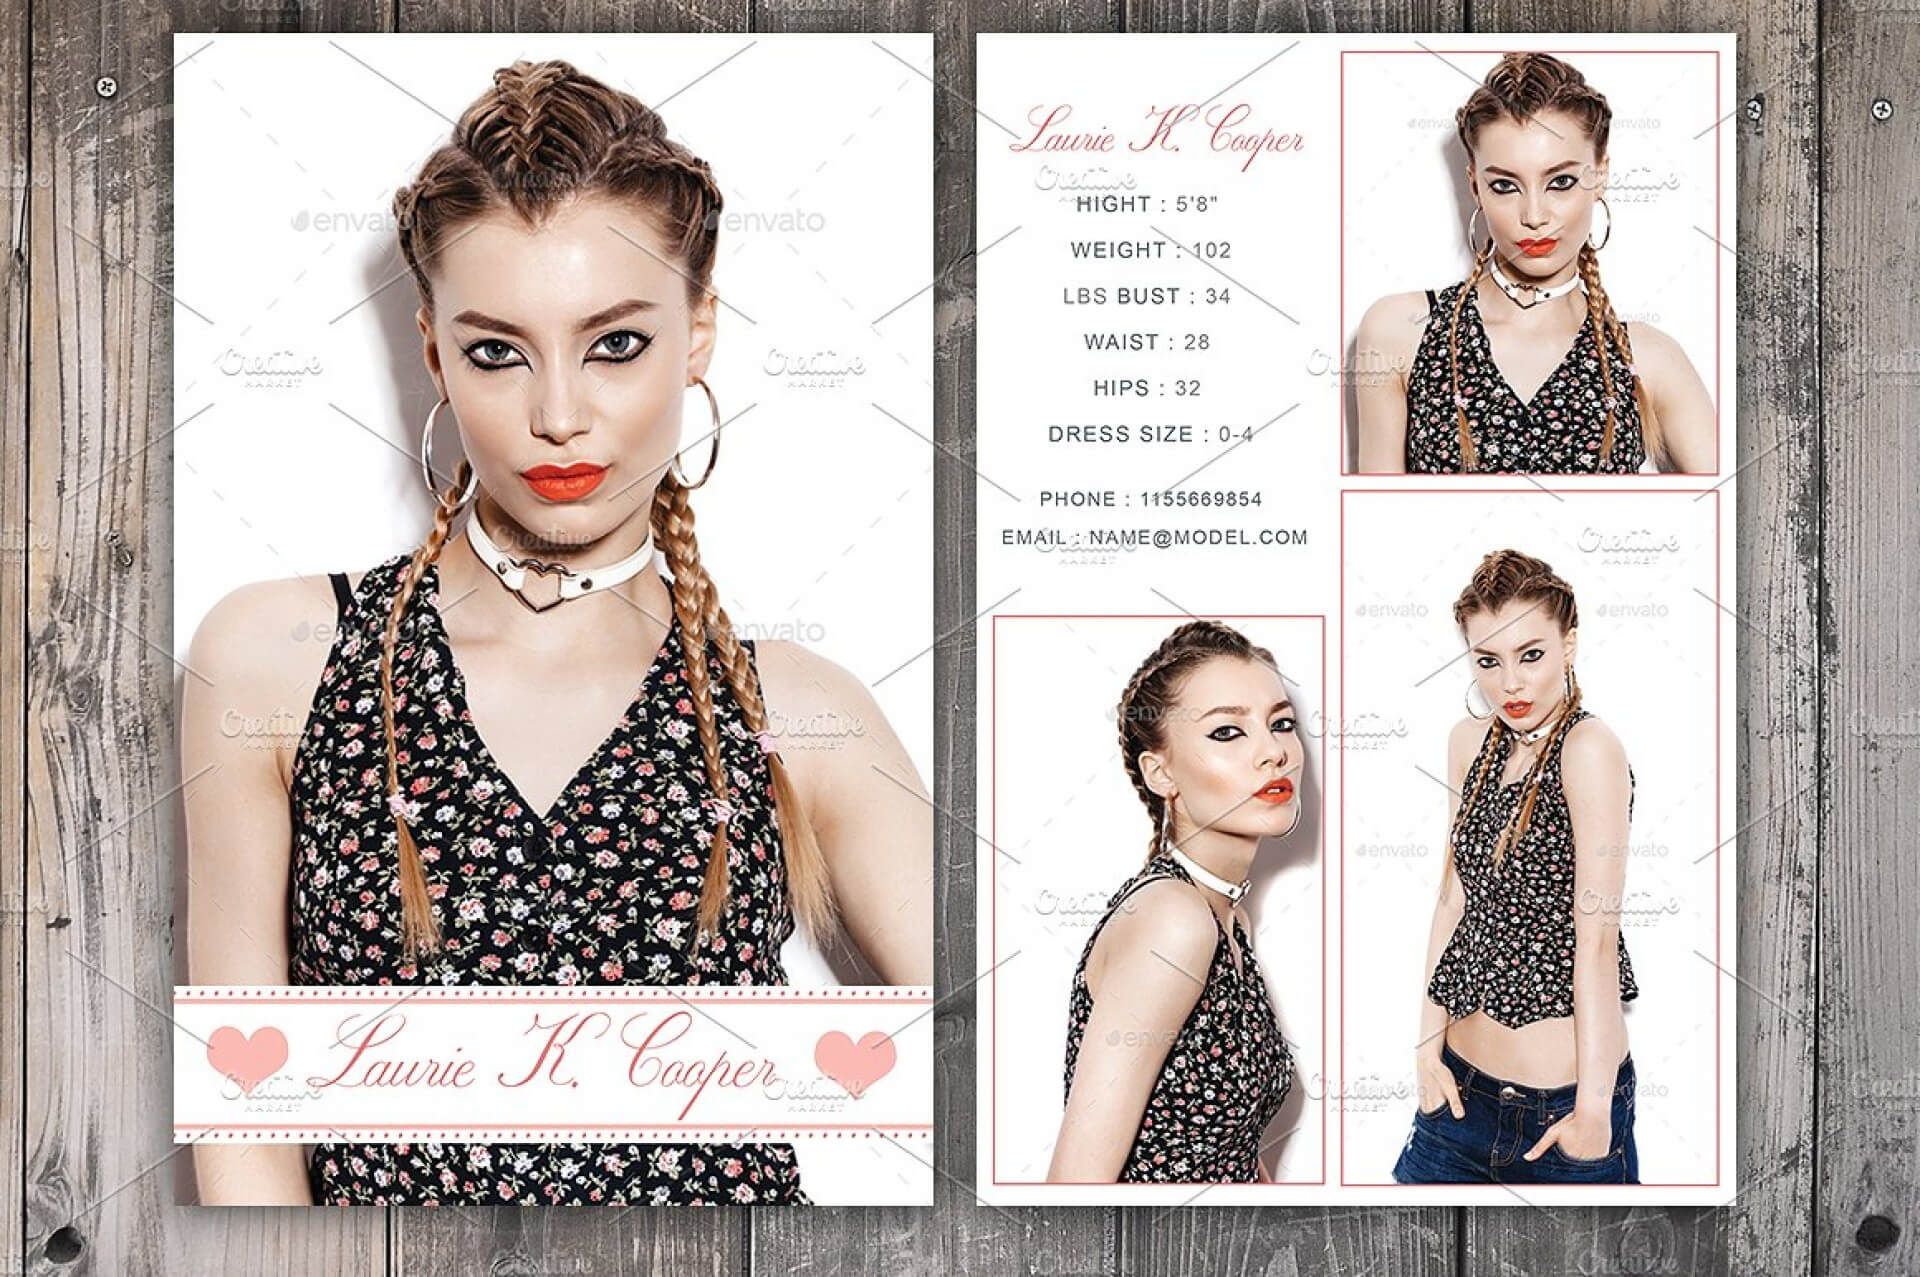 Free Model Comp Card Templates - C Punkt In Free Model Comp Card Template